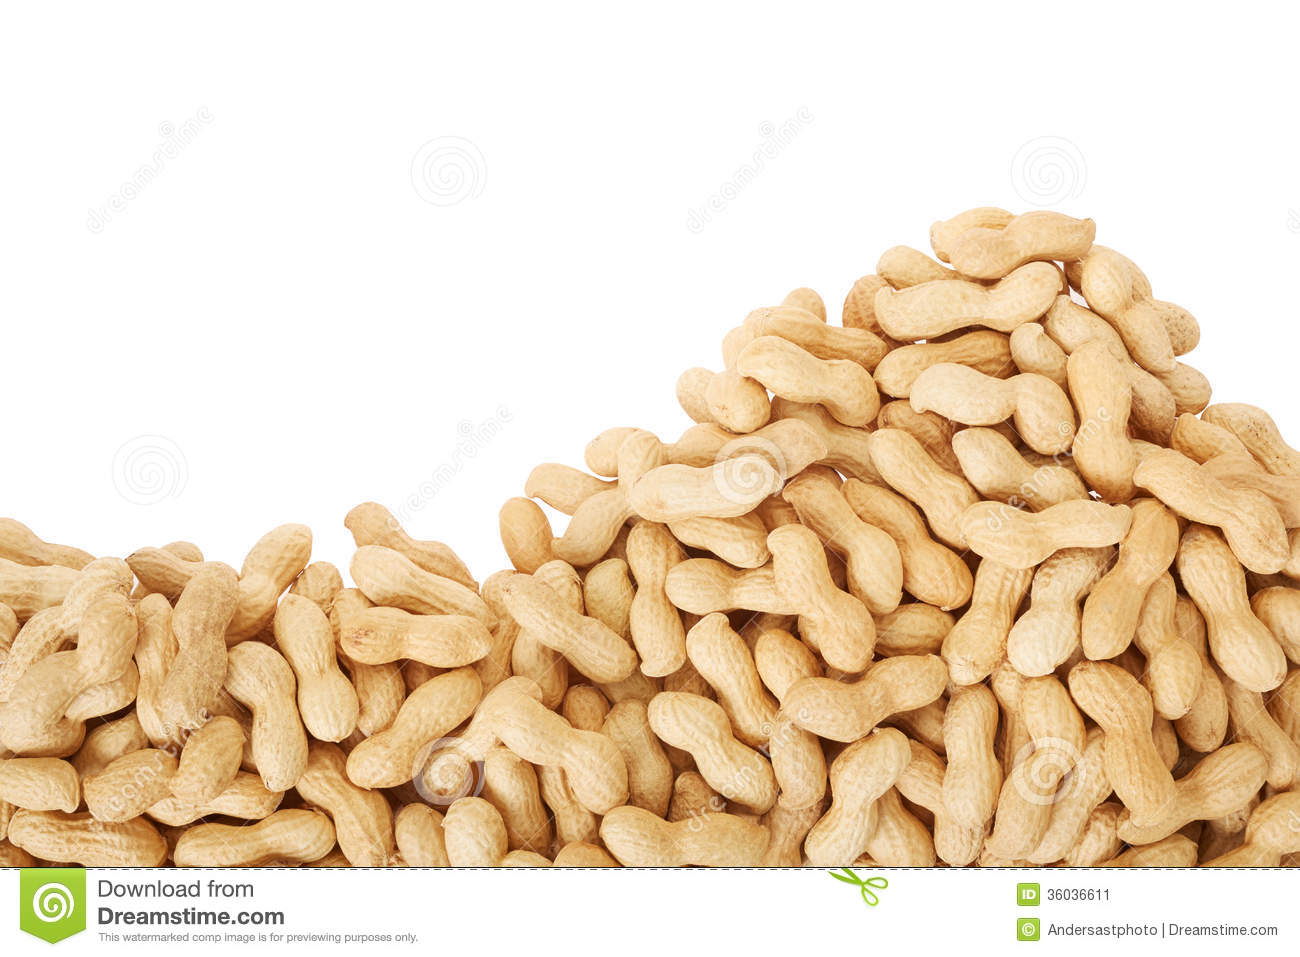 Peanuts In Shell Border Isoalted On White Clipping Path Included